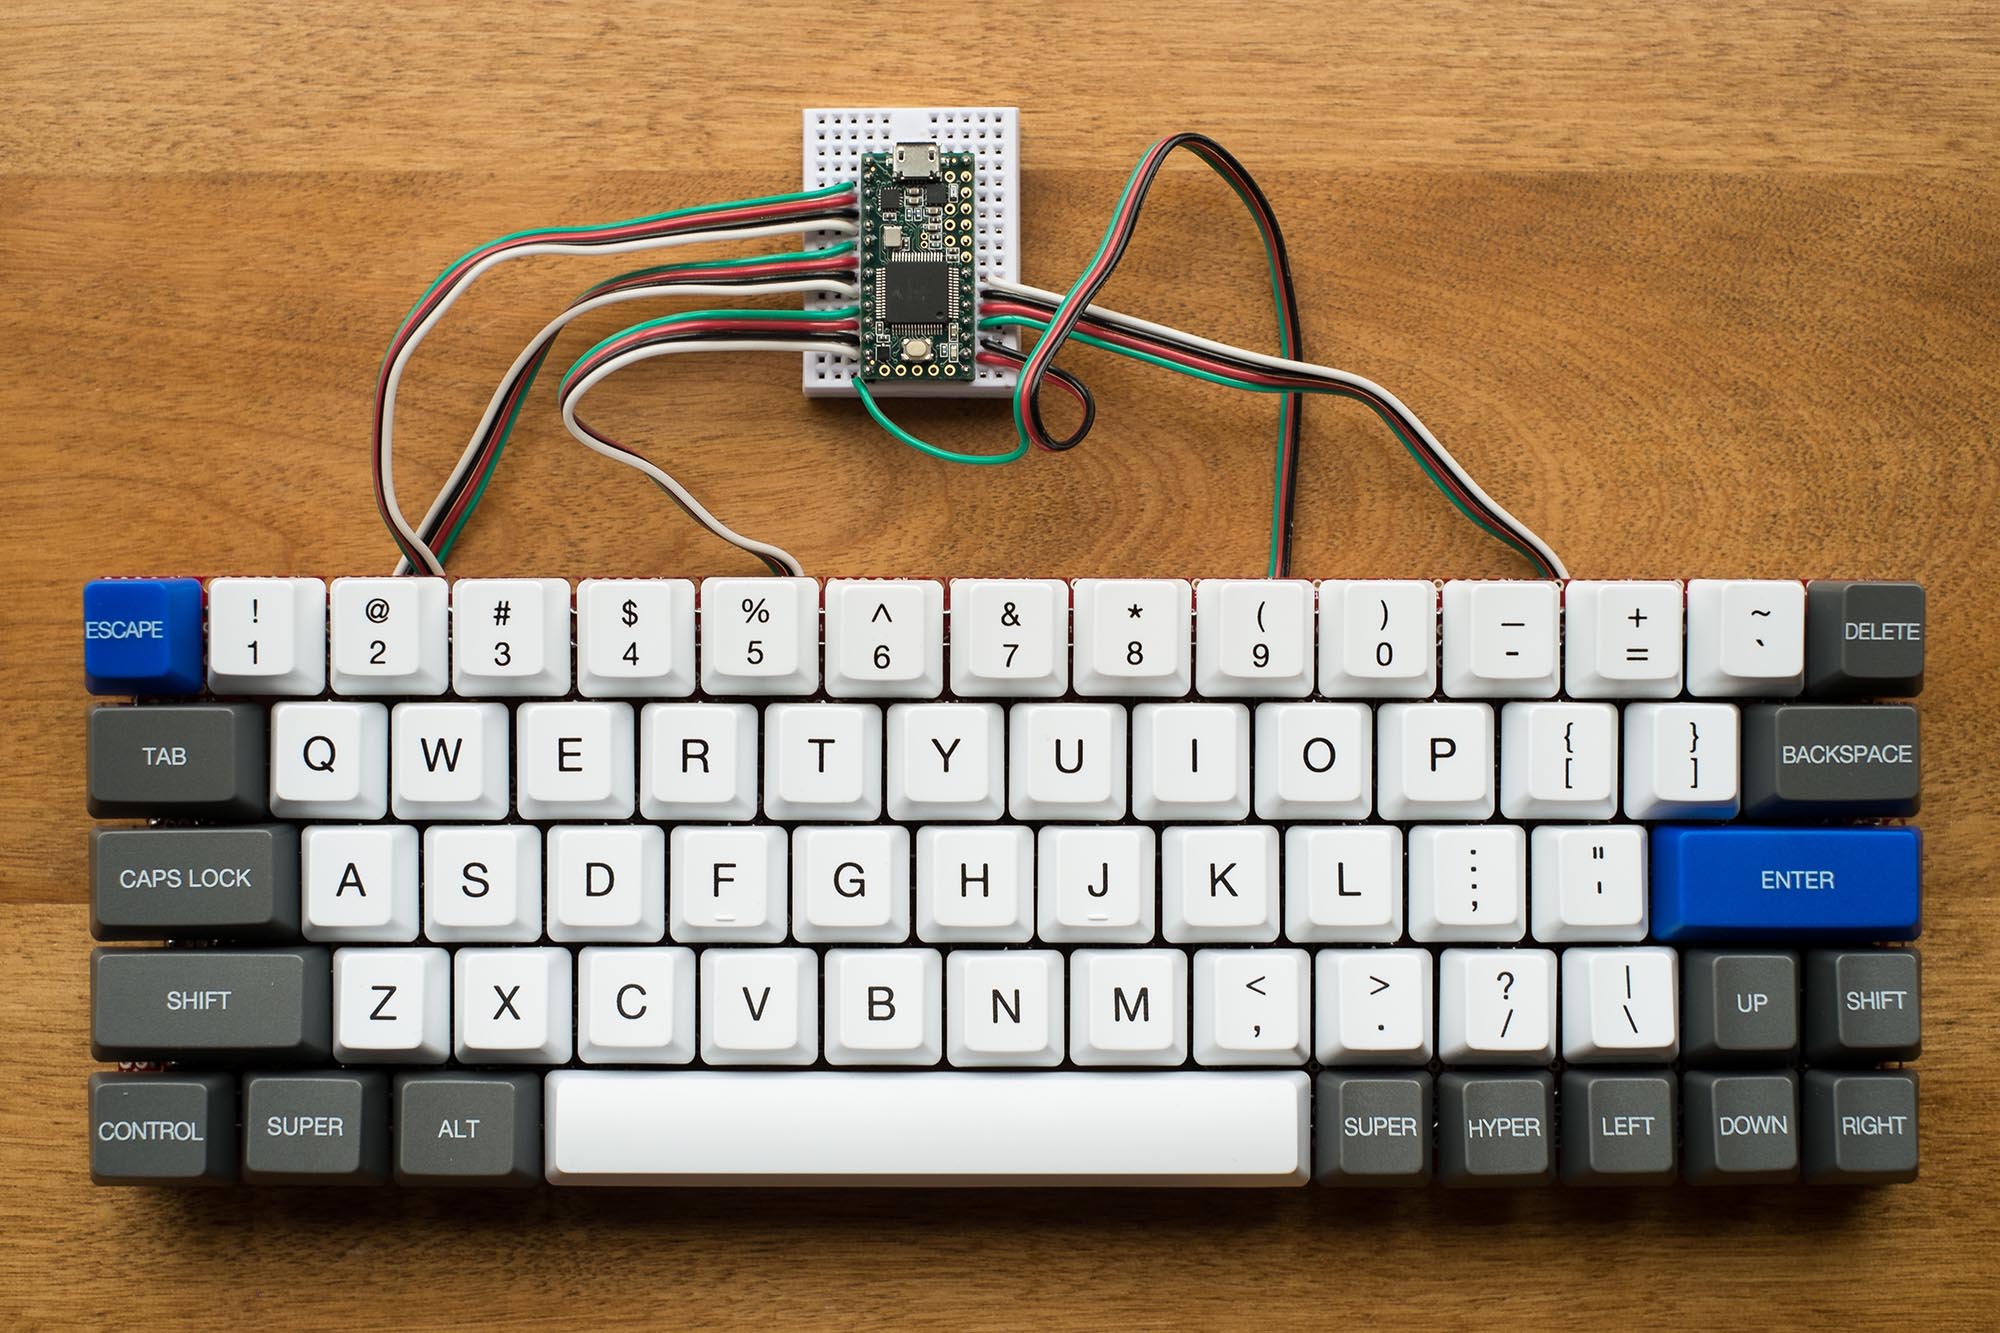 Top view of keyboard with switches soldered on and roughly wired to microcontroller